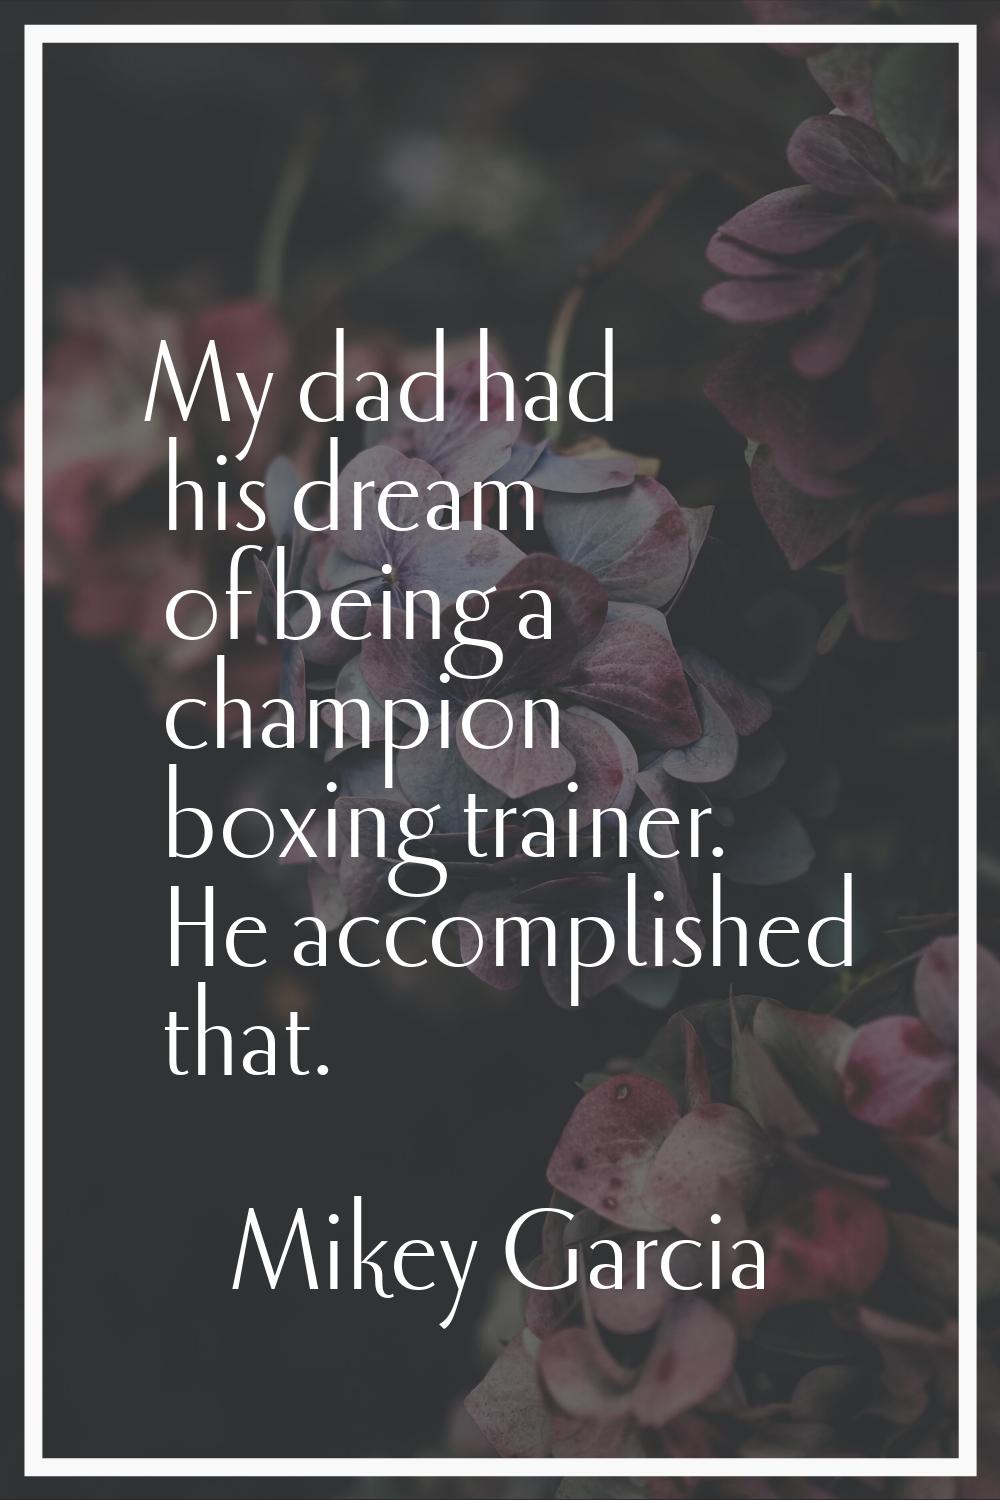 My dad had his dream of being a champion boxing trainer. He accomplished that.